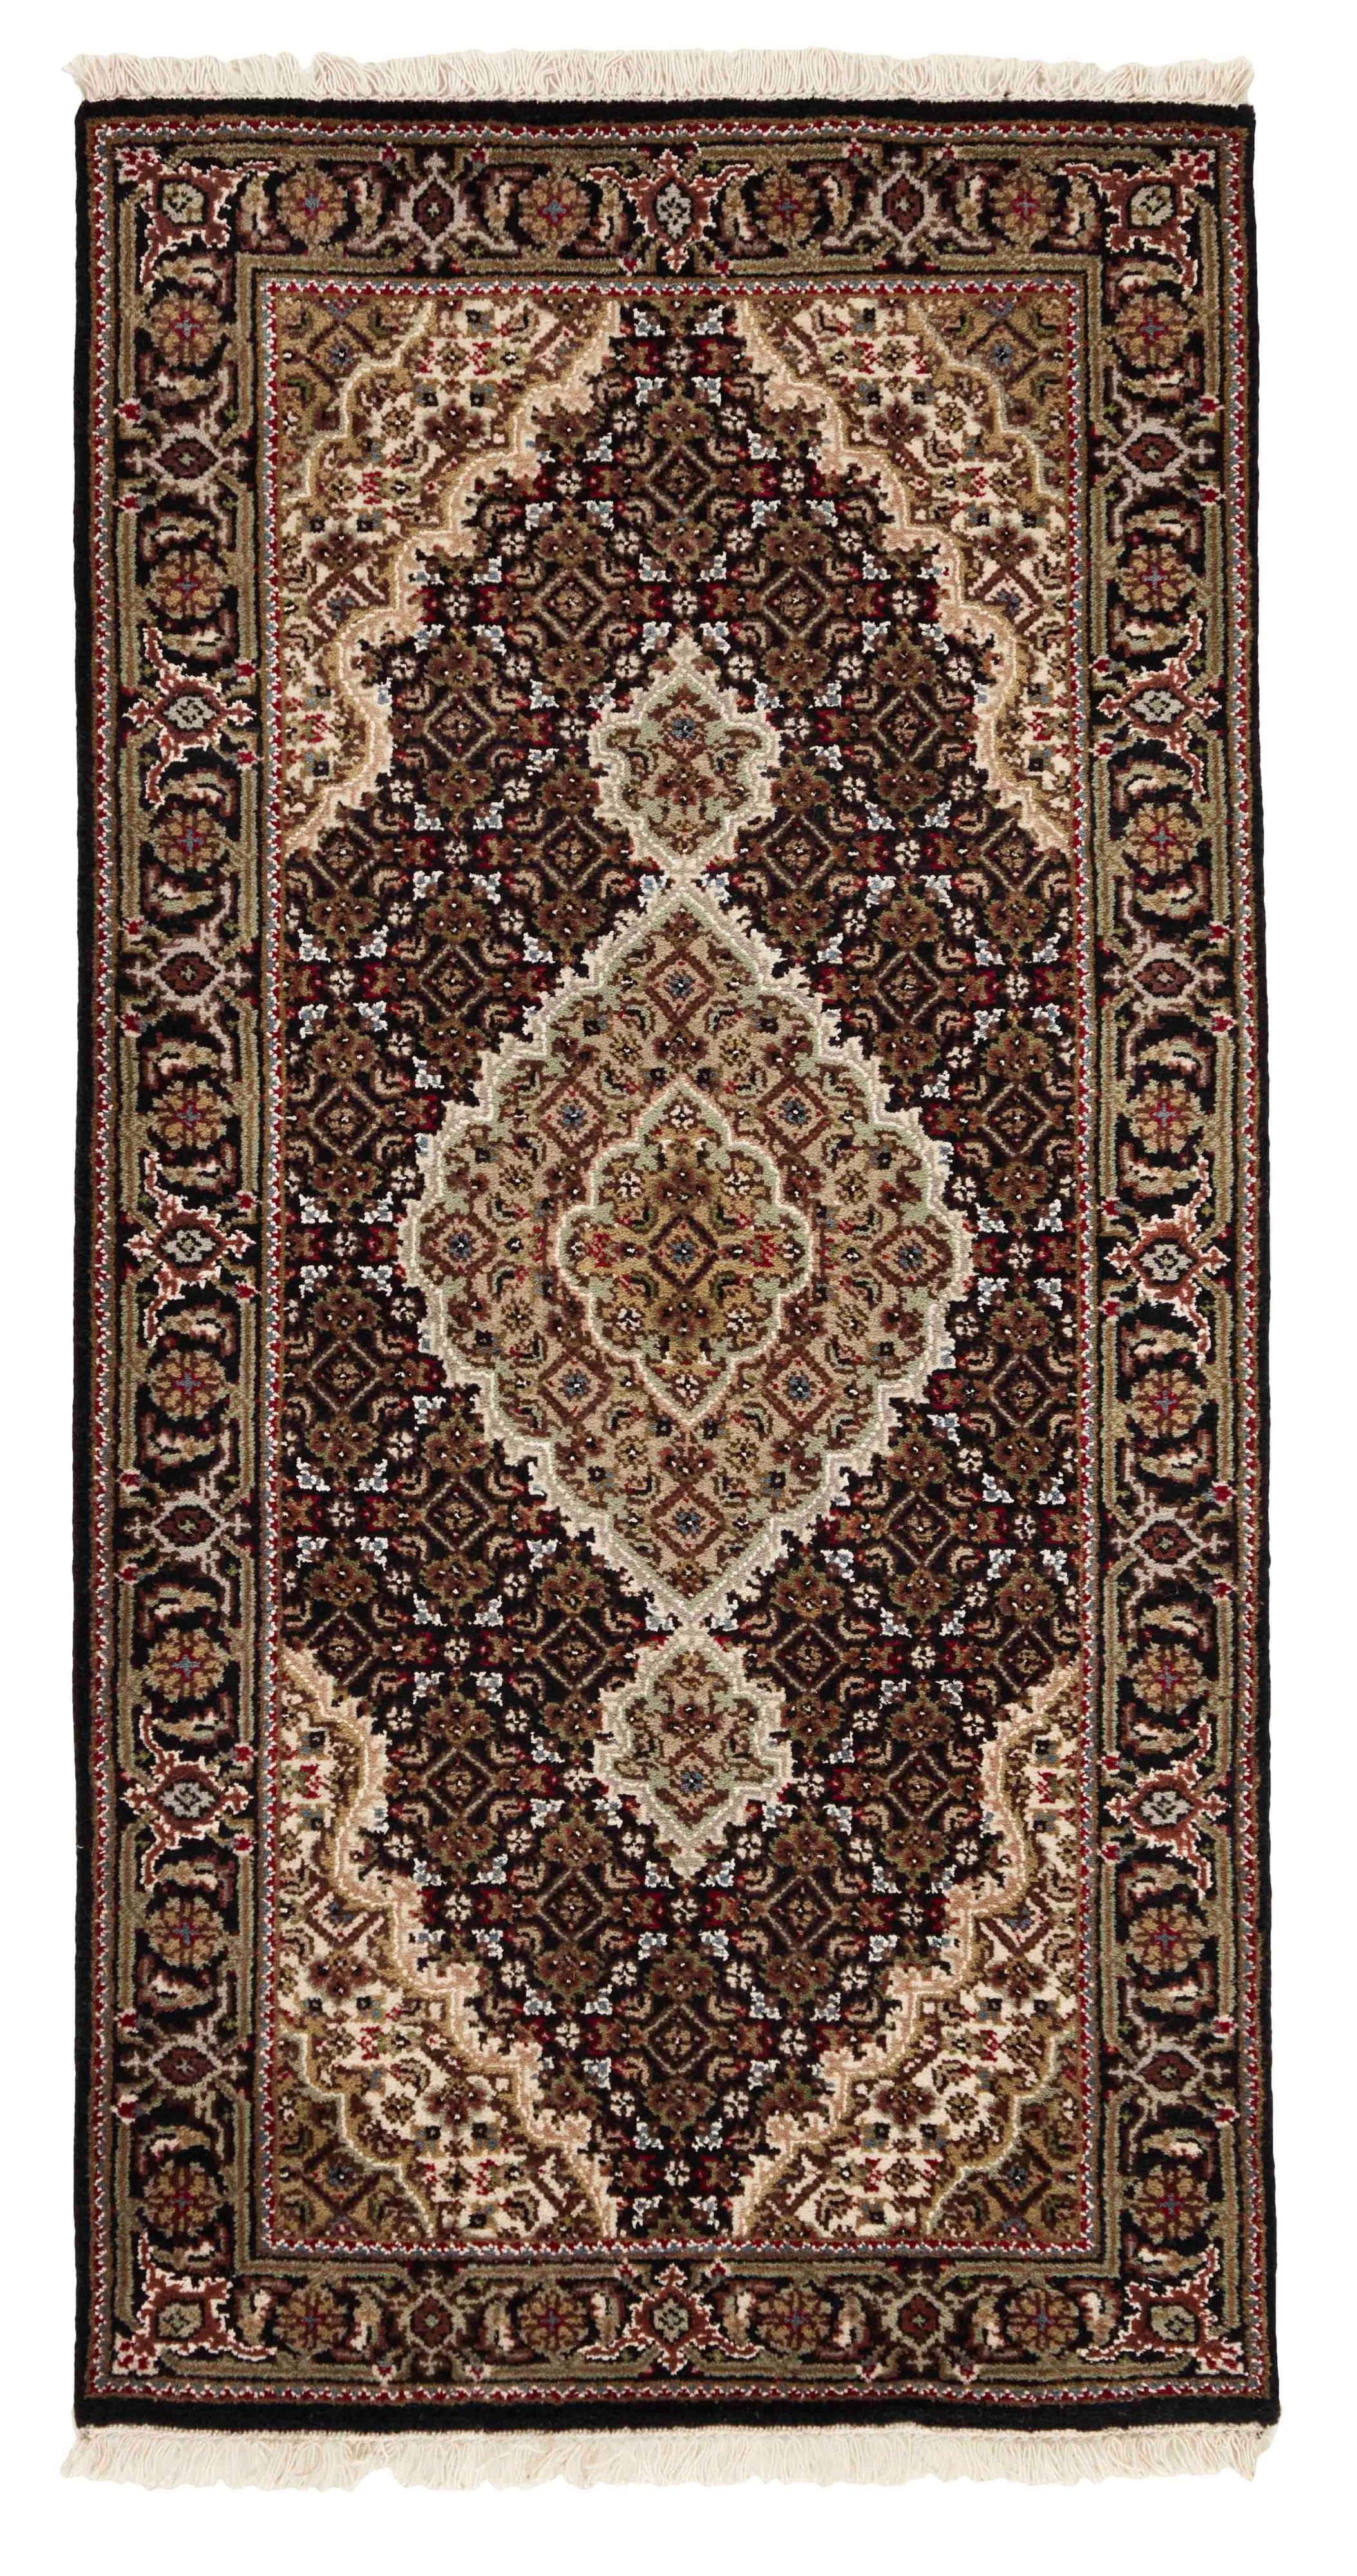 Authentic Oriental rug with traditional geometric and floral design in beige, blue, green and black